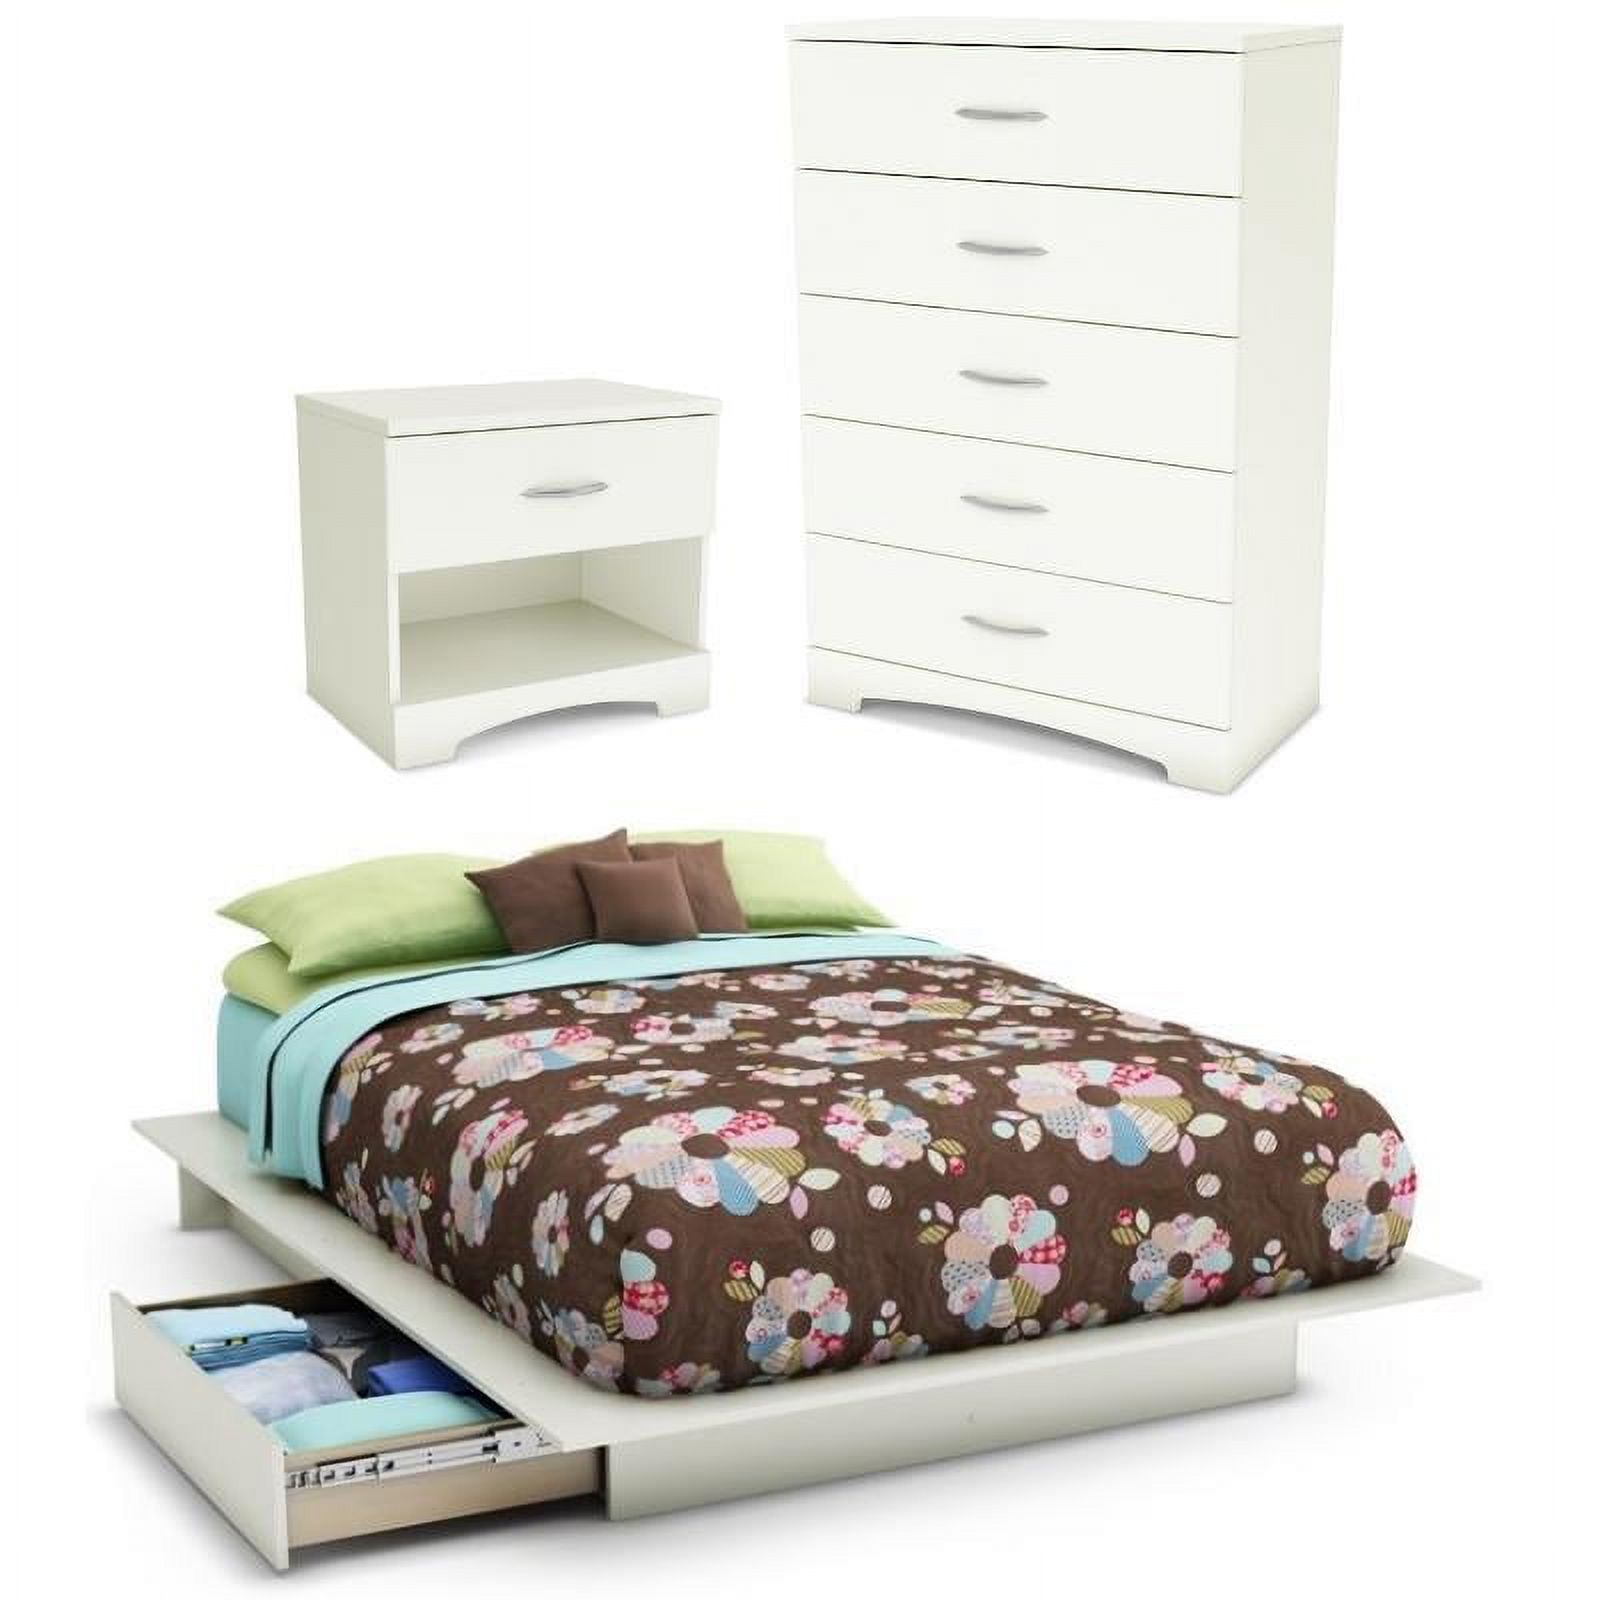 Home Square 3-Piece Set with Full Queen Storage Bed Nightstand & 5-Drawer Chest - image 1 of 19